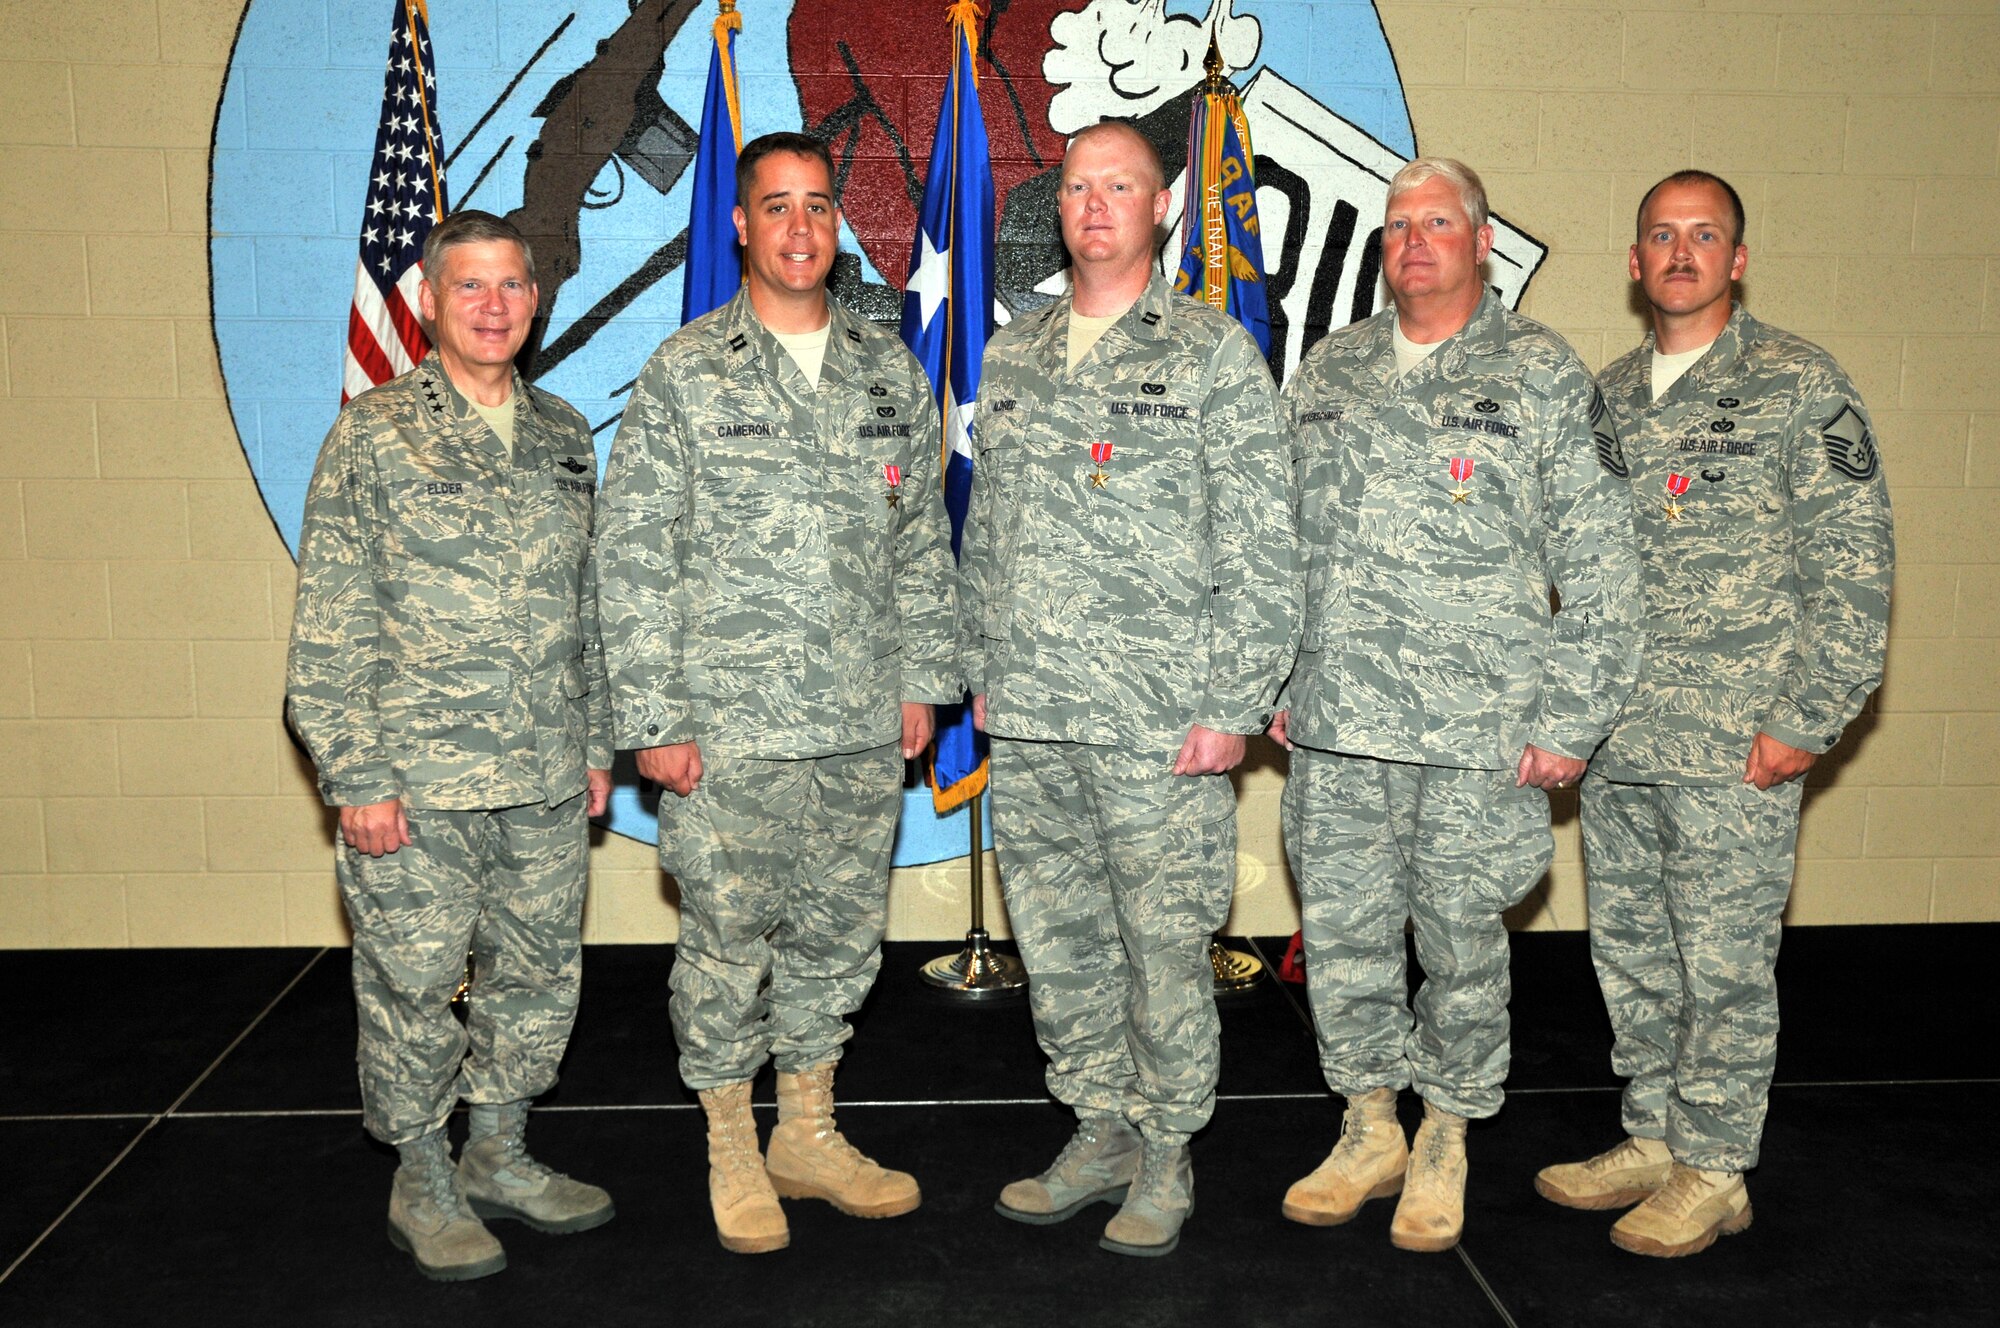 Lt. Gen. Robert Elder, Eighth Air Force (Air Forces Strategic) commander, poses with the four members of the 819th RED HORSE Squadron after presenting them with Bronze Star Medals for their recent service while deployed to Iraq and Afghanistan. Pictured left to right with the general are Capt. Glenn Cameron, Capt Josh Aldred, Chief Master Sgt. Gary Stuckenschmidt and Master Sgt. Todd Pederson. (U.S. Air Force photo/John Turner)